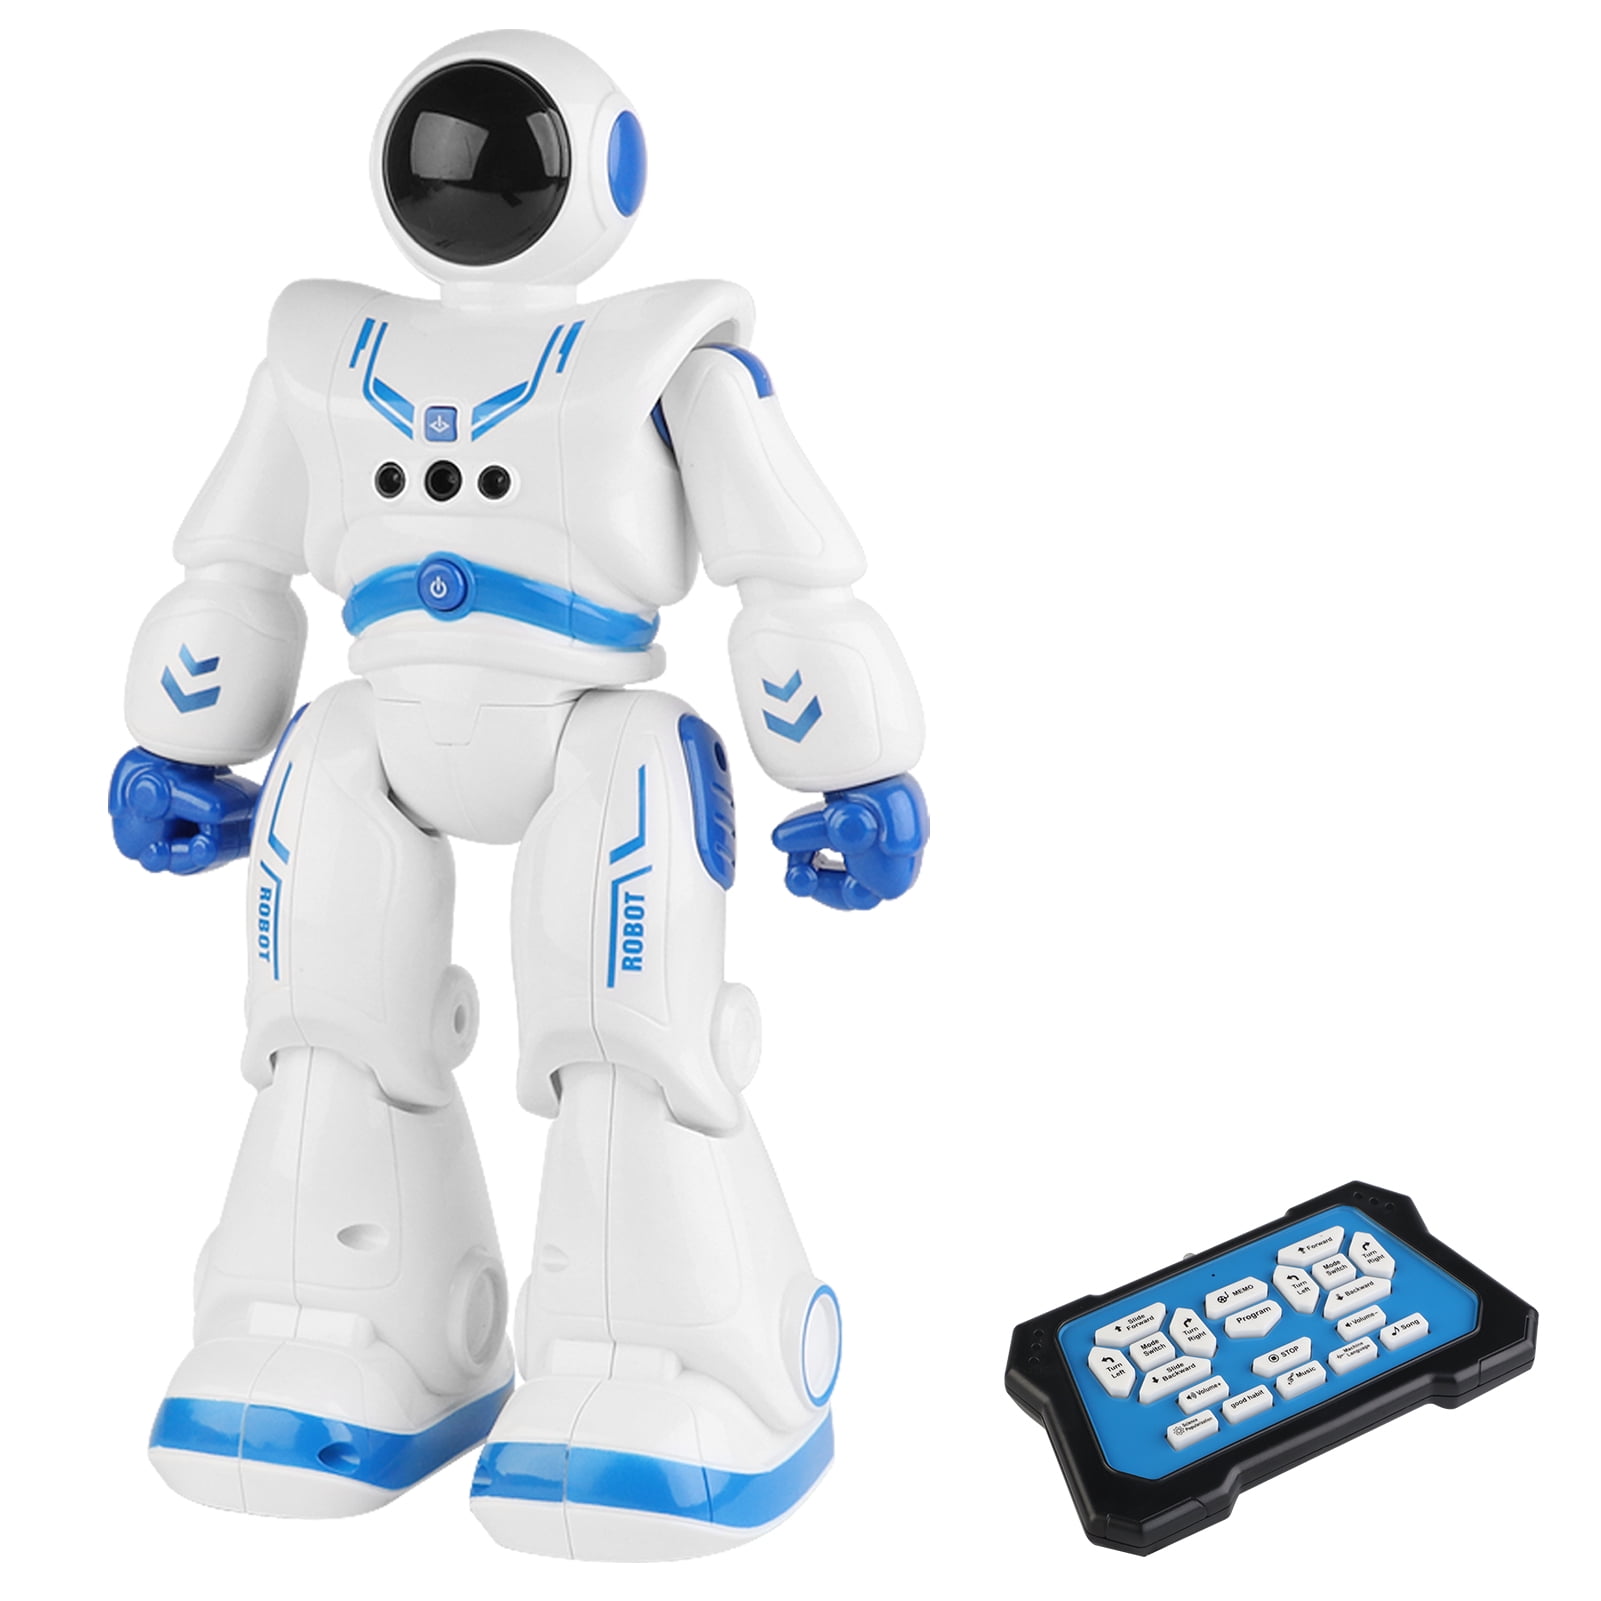 SGILE 817+790+089 RC Robot Toy for sale online 